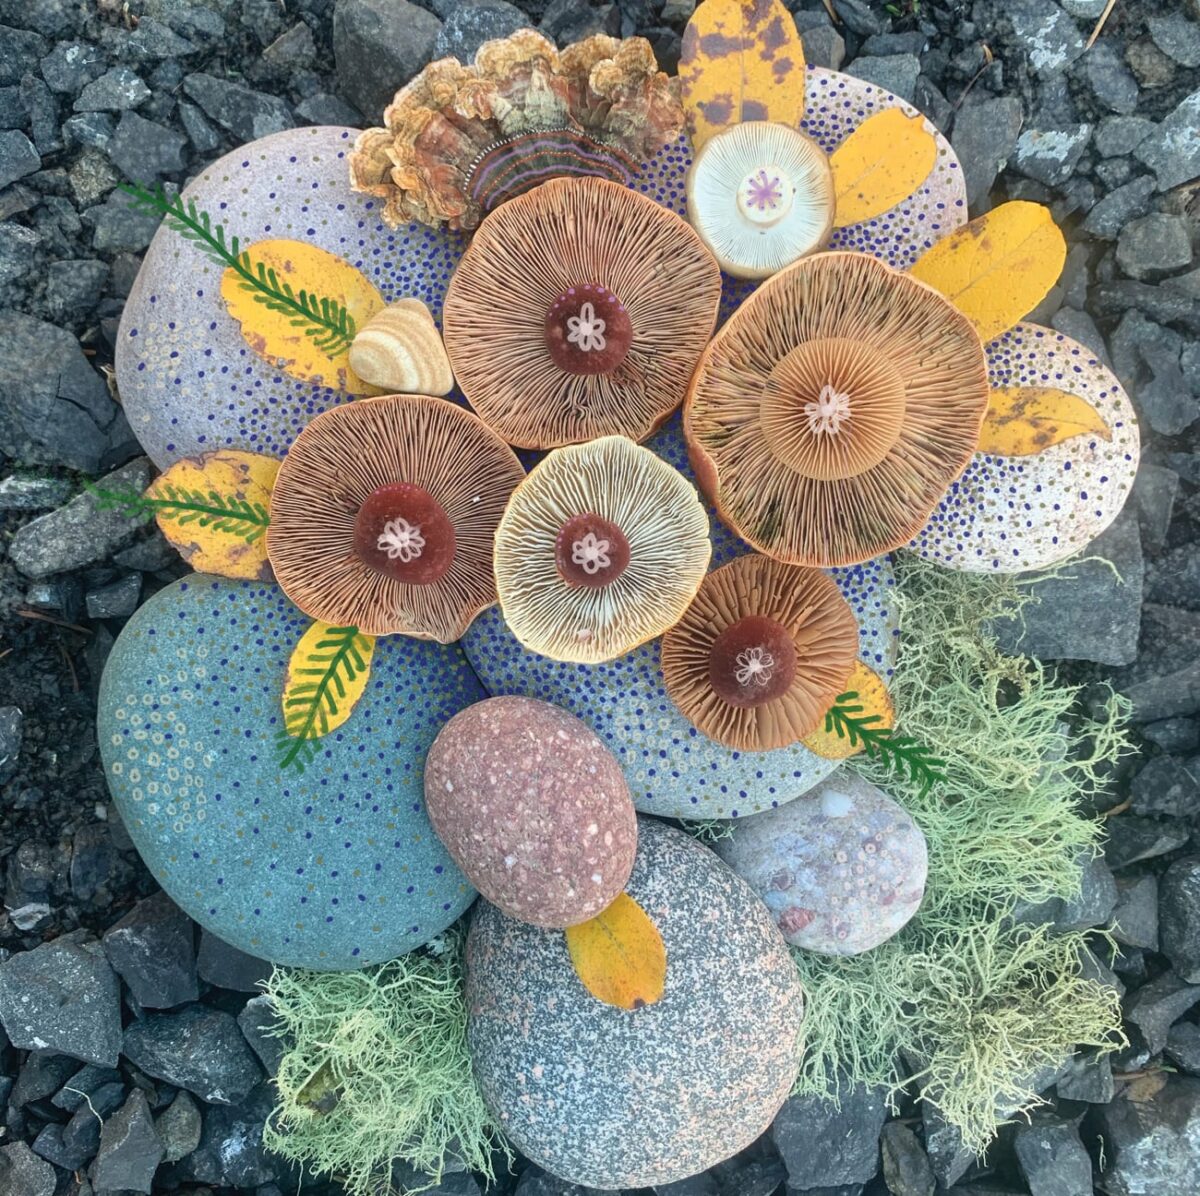 Colorful Arrangements Made Of Mushrooms By Jill Bliss 5